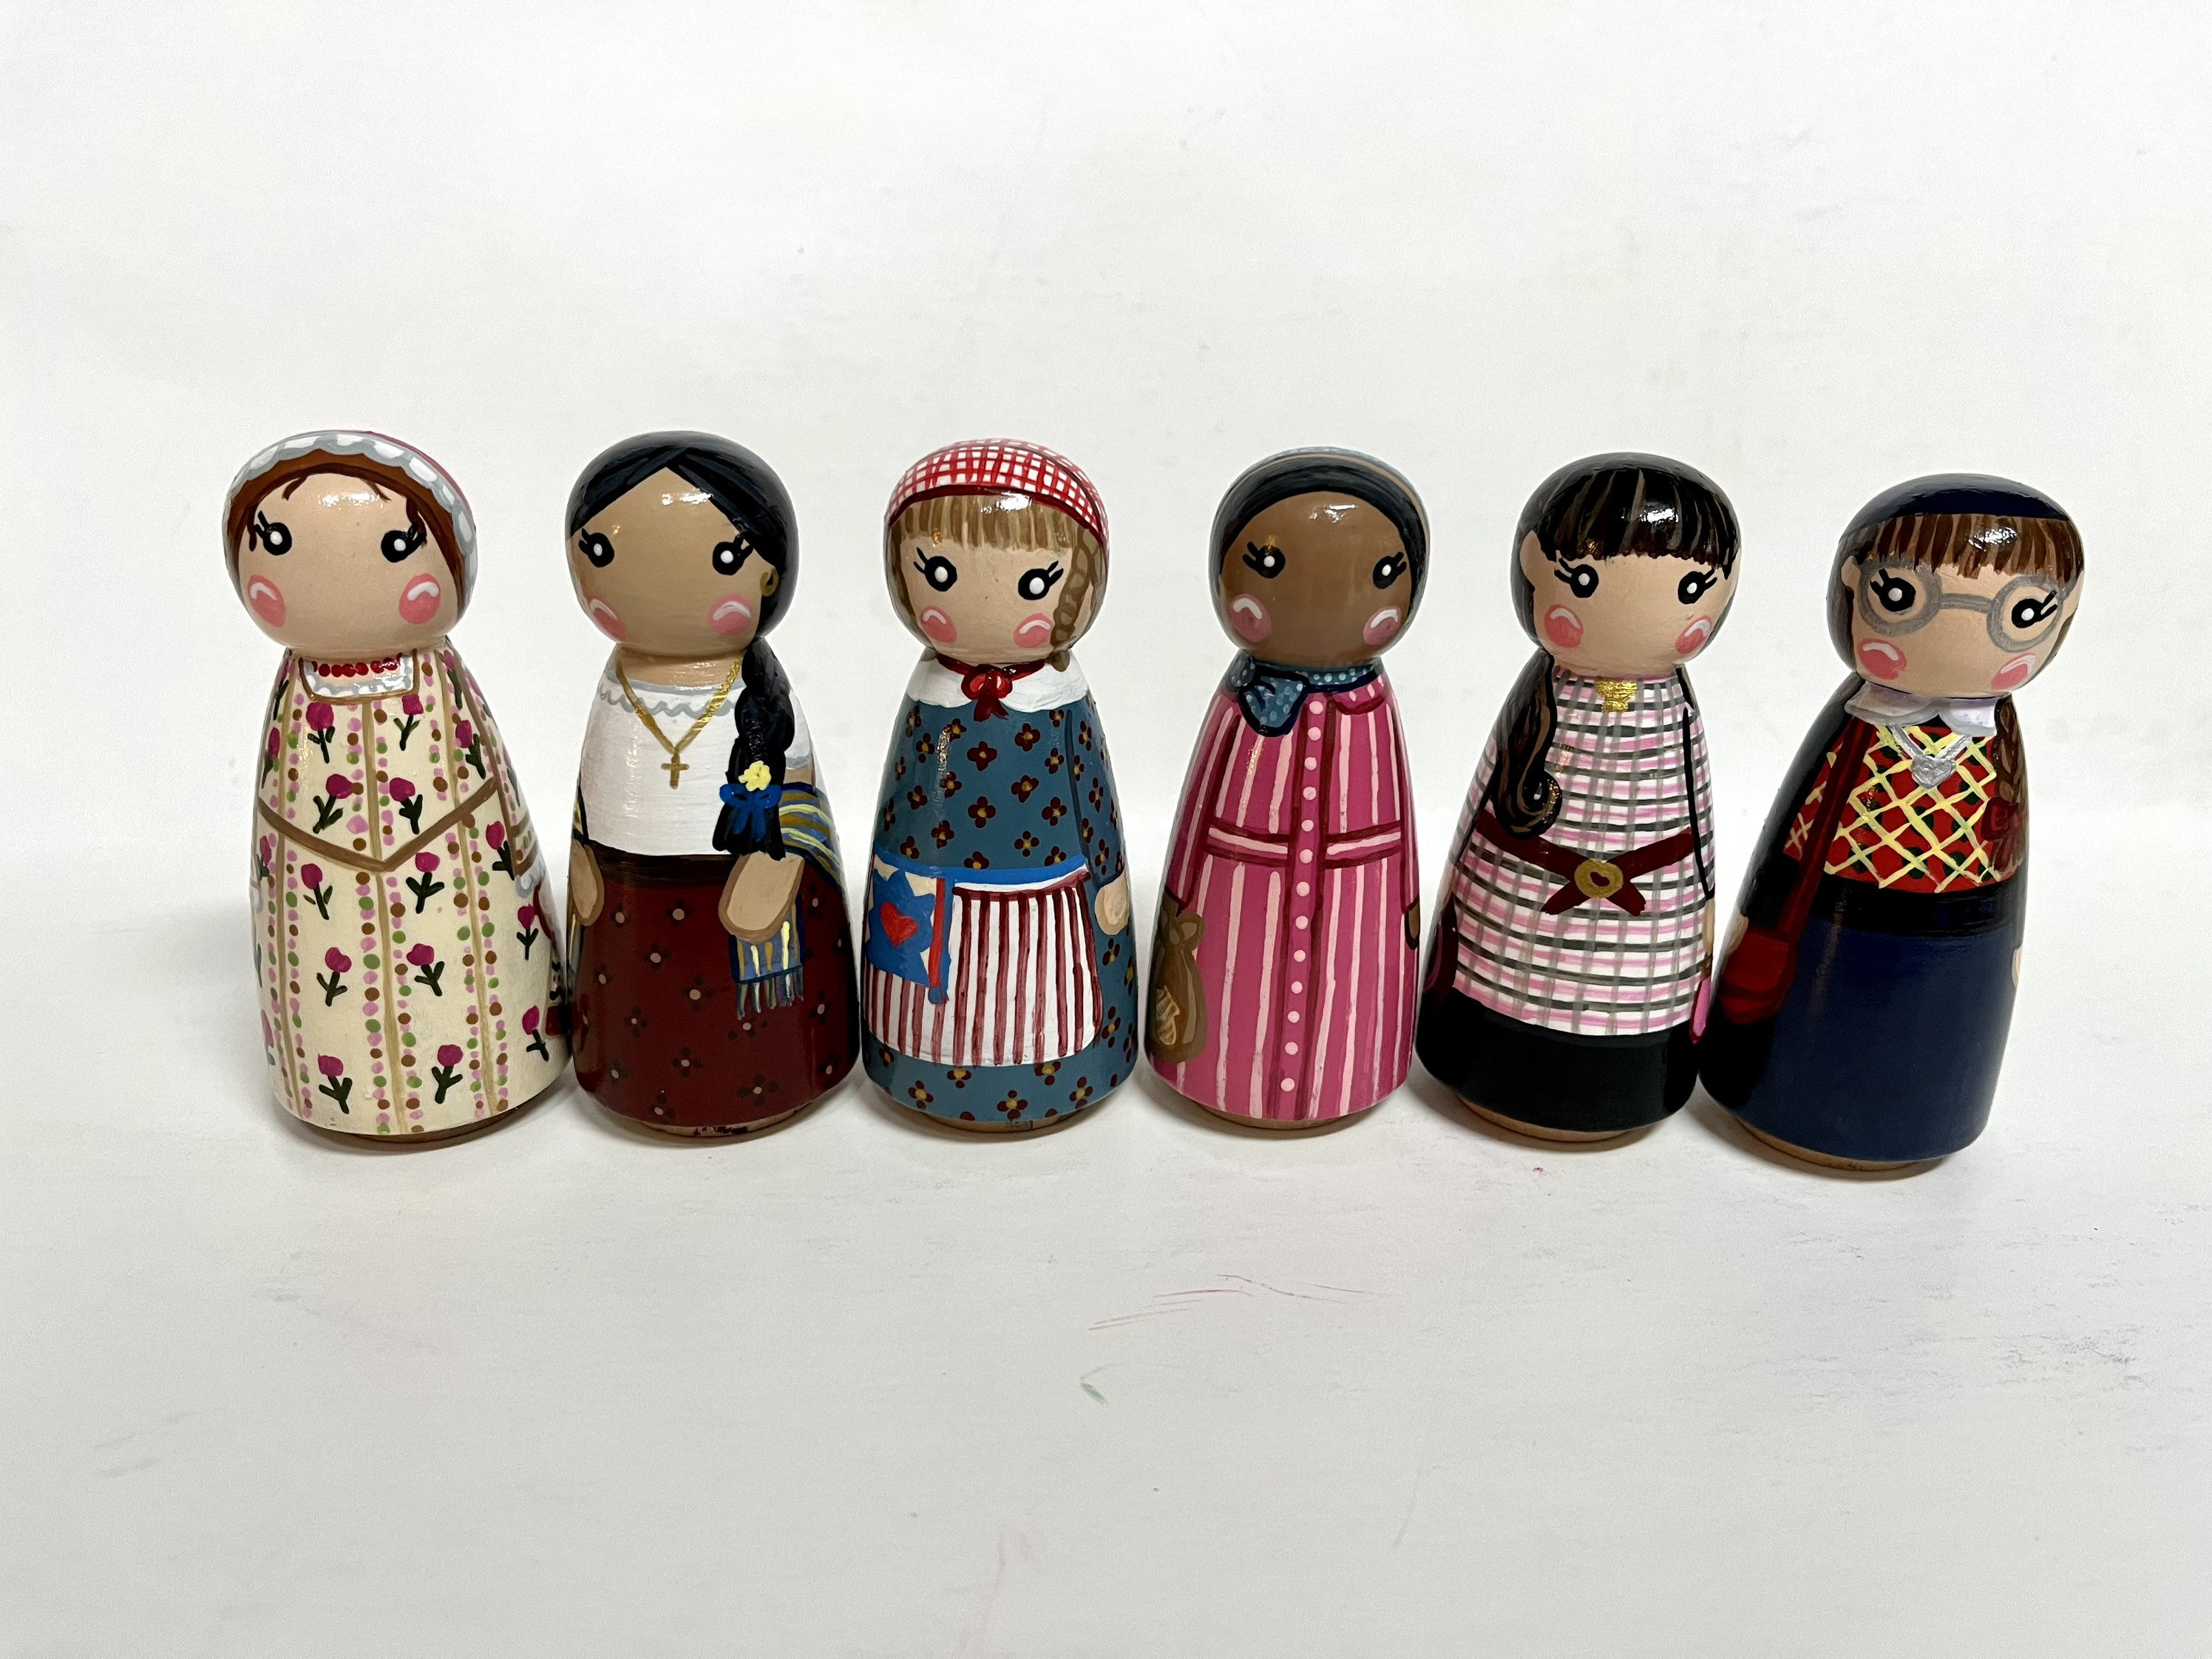 Hand Painted Peg Dolls, Wooden Dolls, Women in History, Educational, Wooden  Toys 